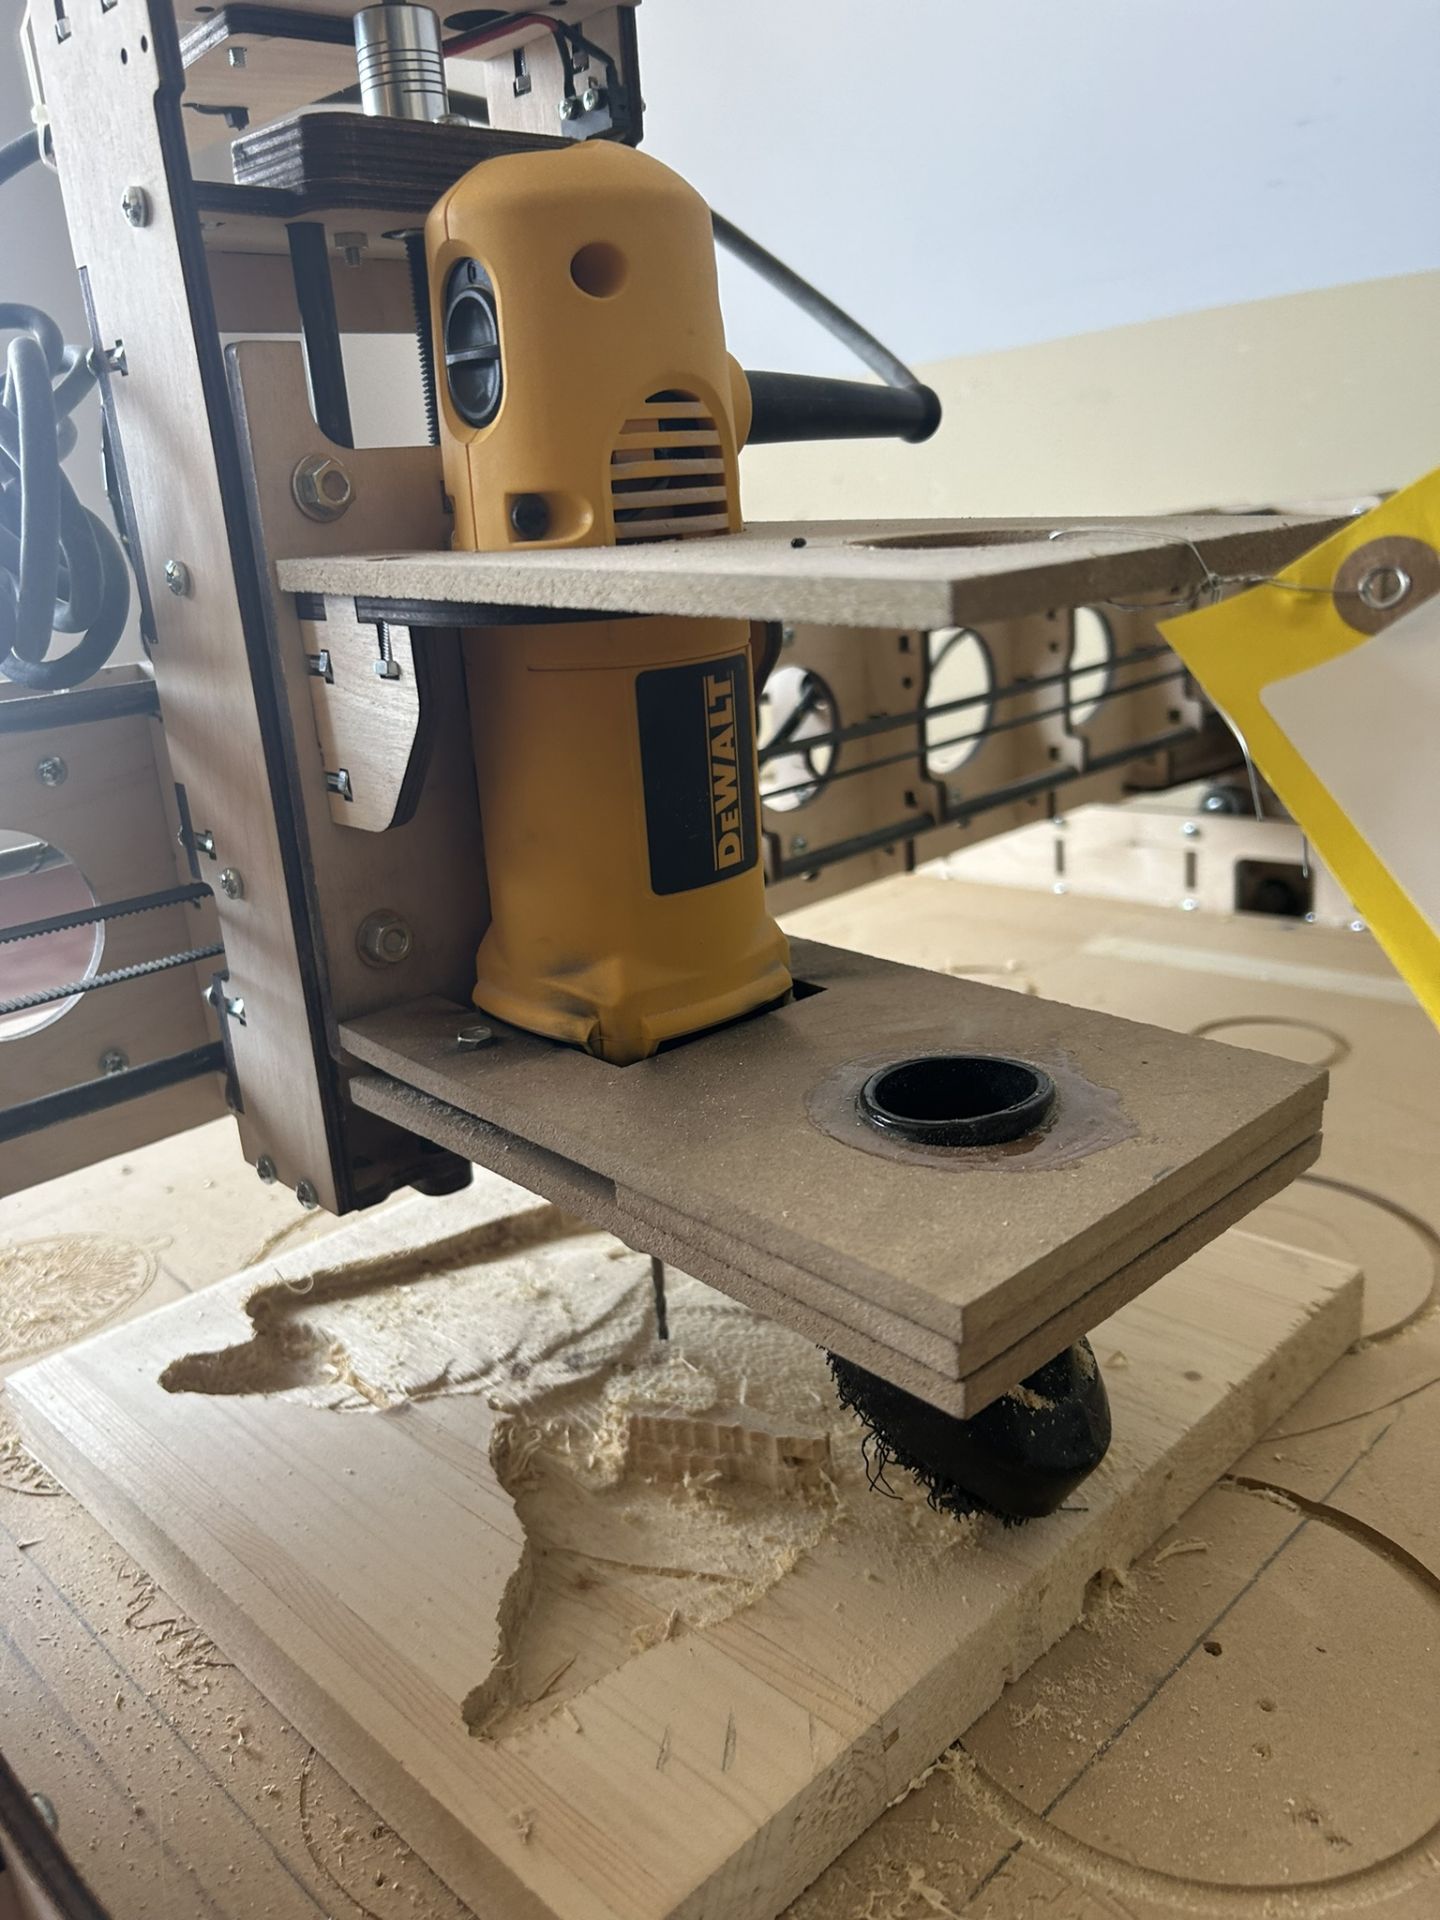 DESKTOP CNC ROUTER W/ DEWALT CUT OUT TOOL 24"X24" AND DUST HOOD (DUST EXTRACTION HOSE NOT INCLUDED) - Image 4 of 16